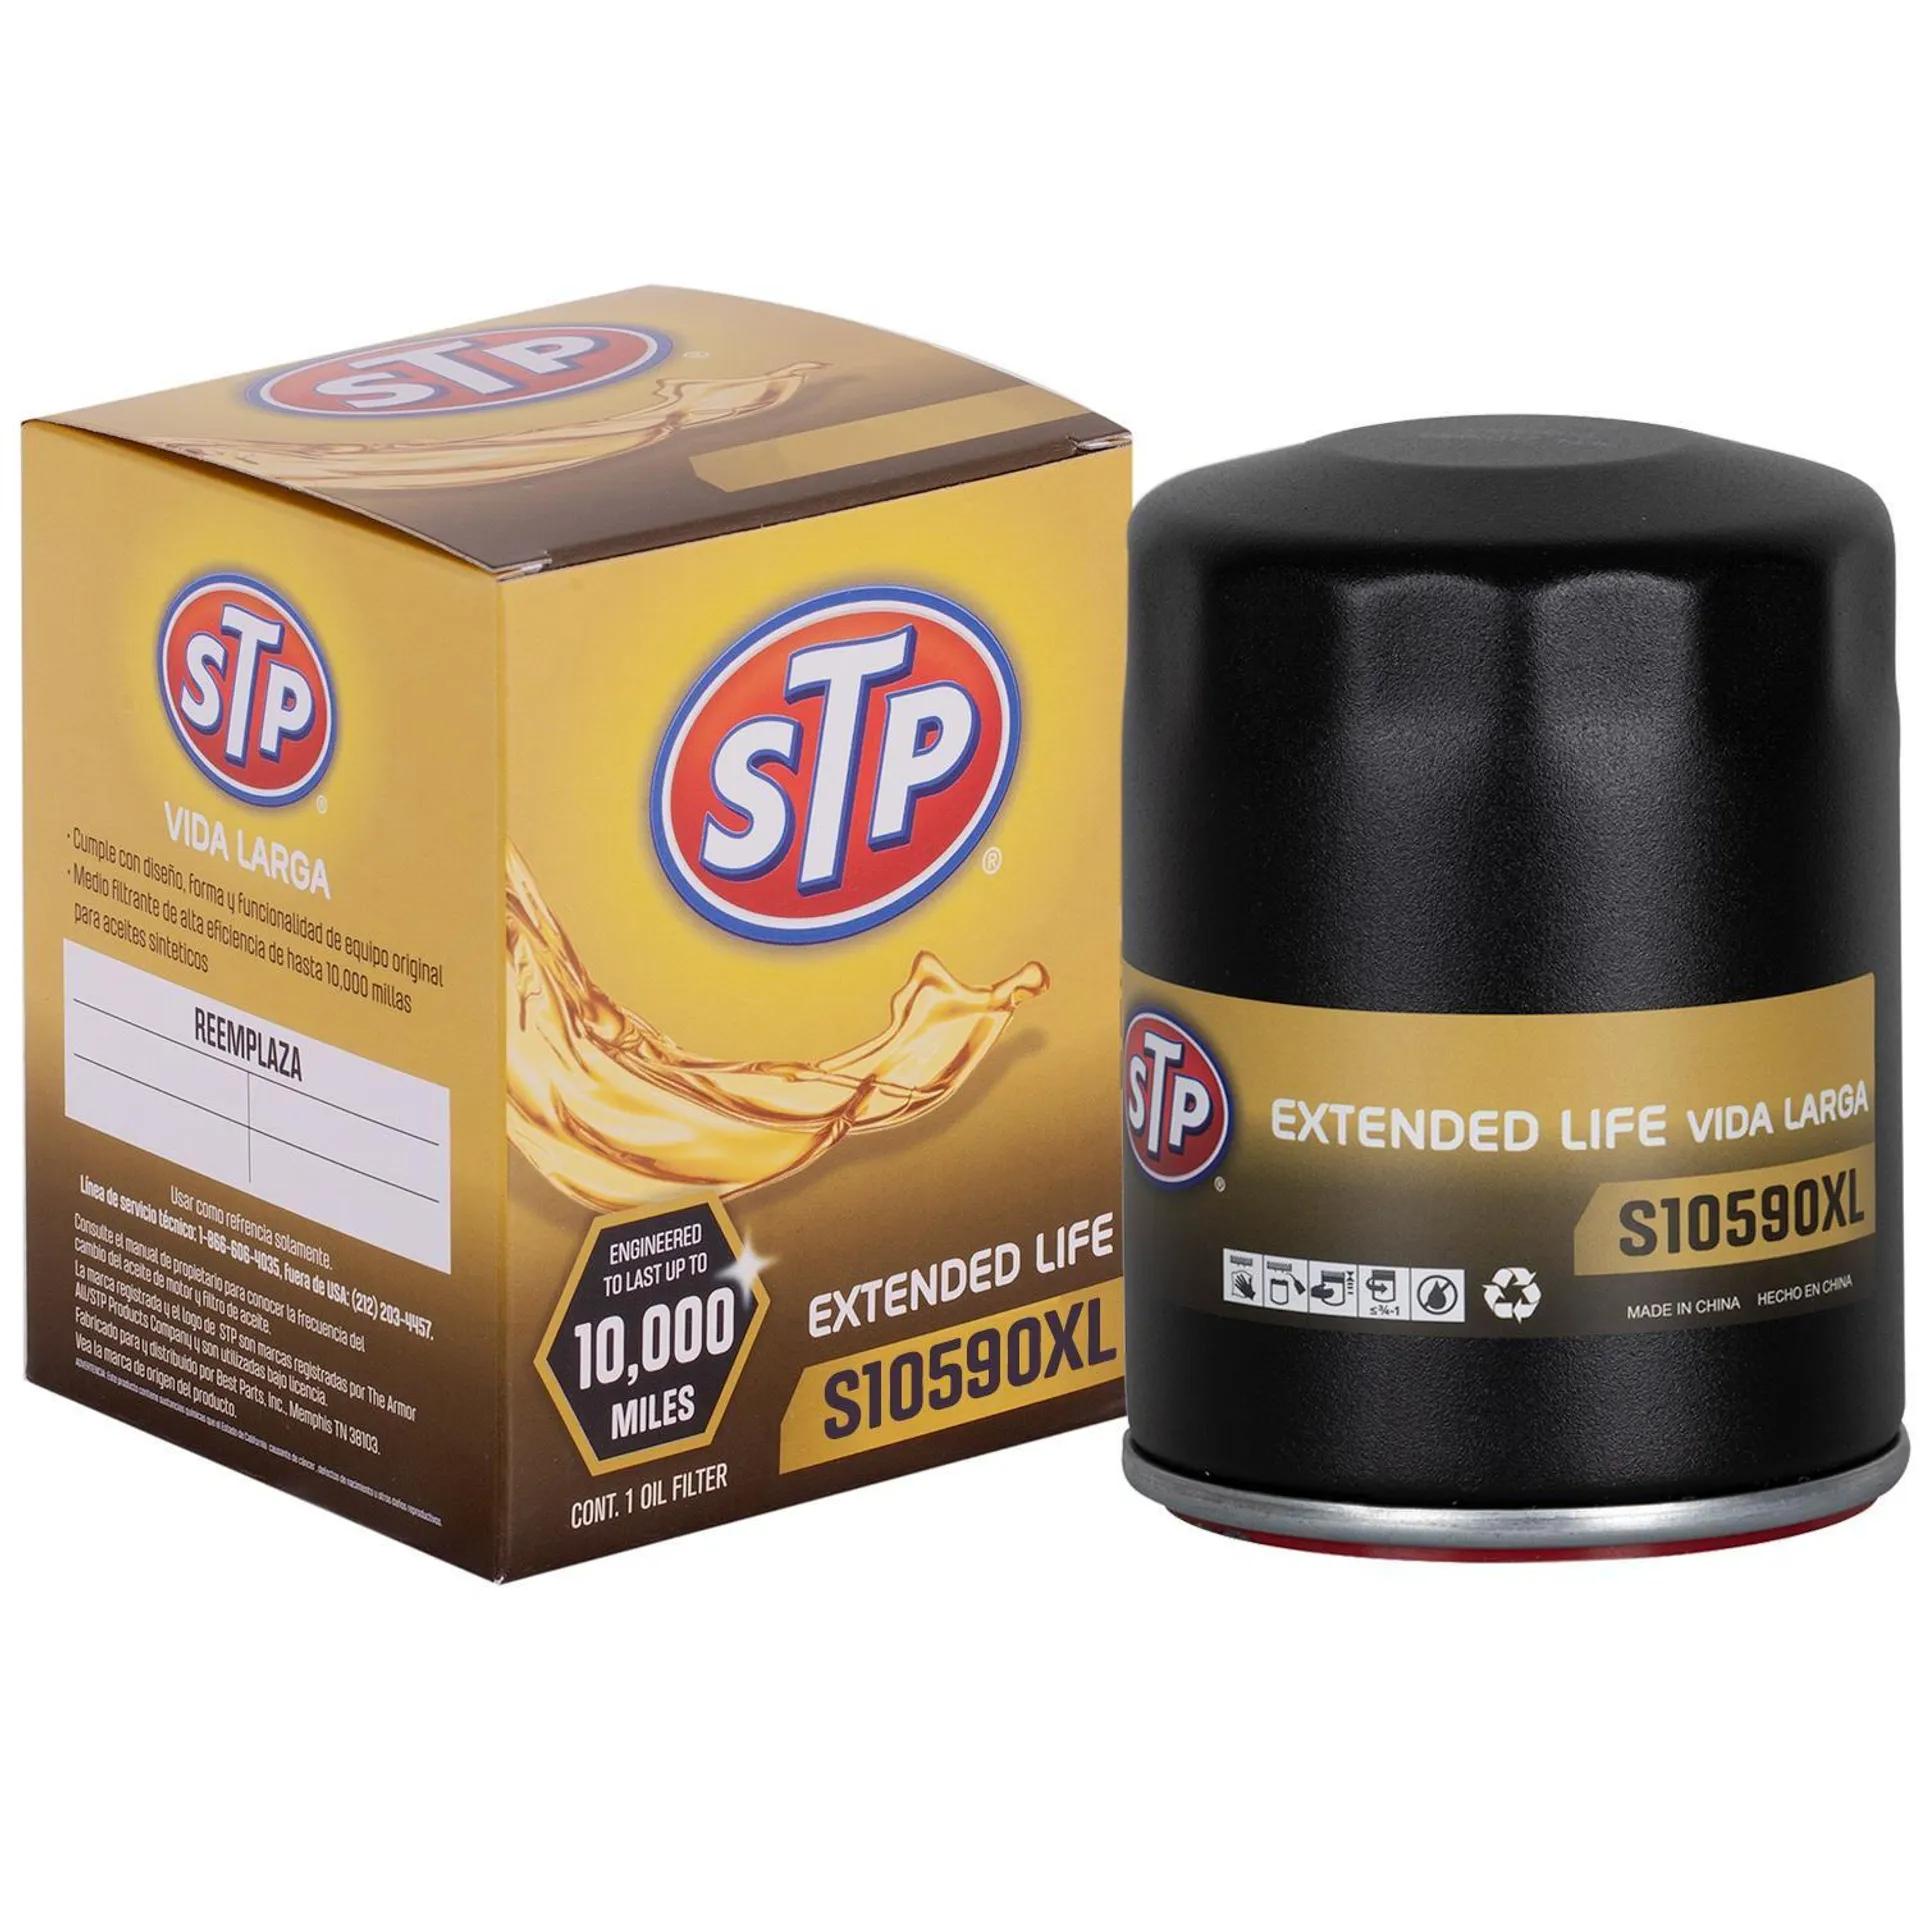 STP Extended Life Oil Filter S10590XL